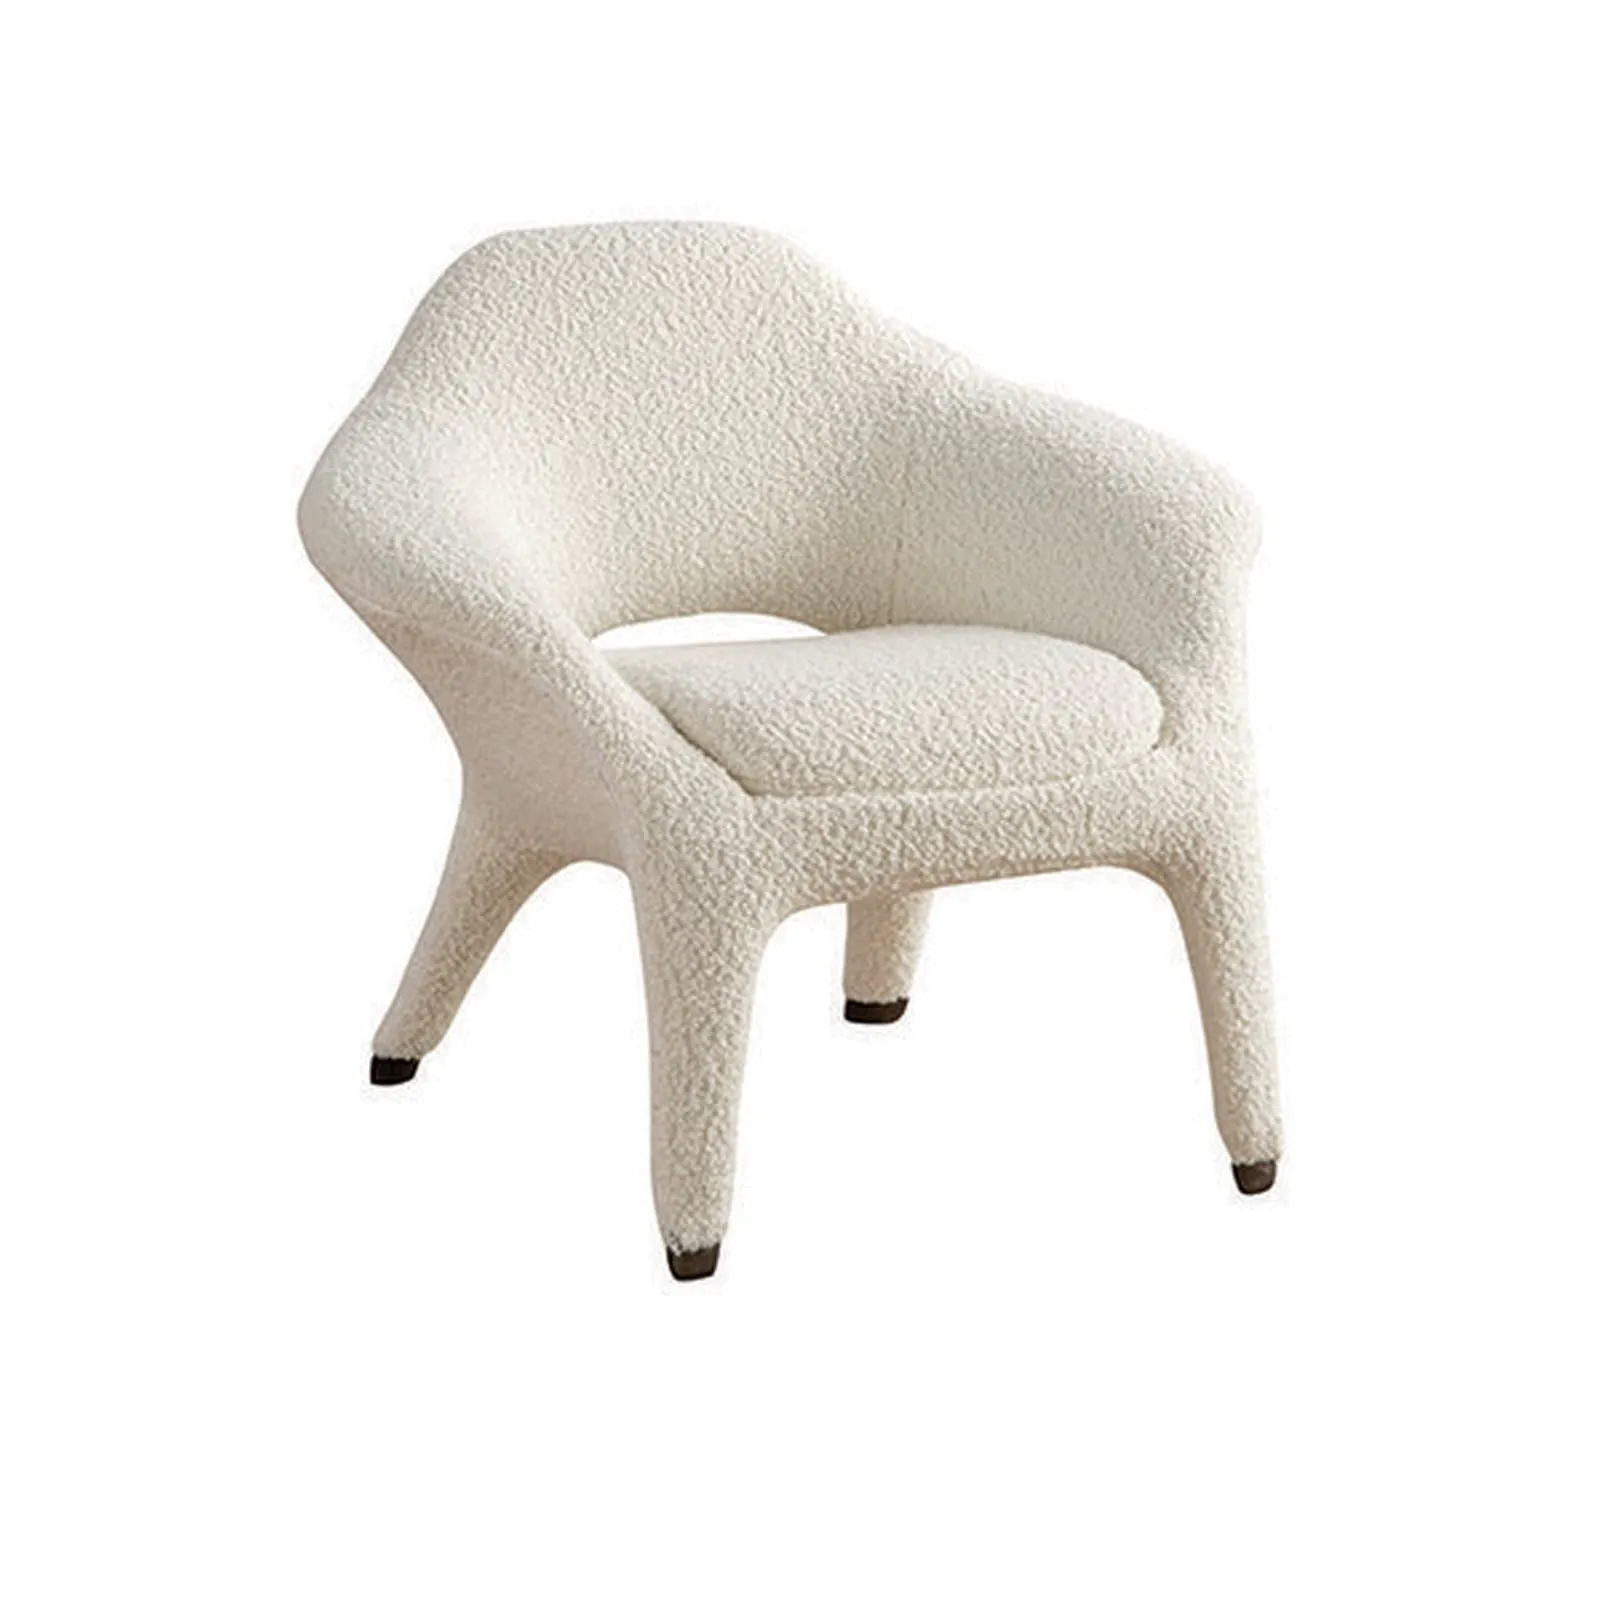 Curly wool furniture: a chic and timeless covering